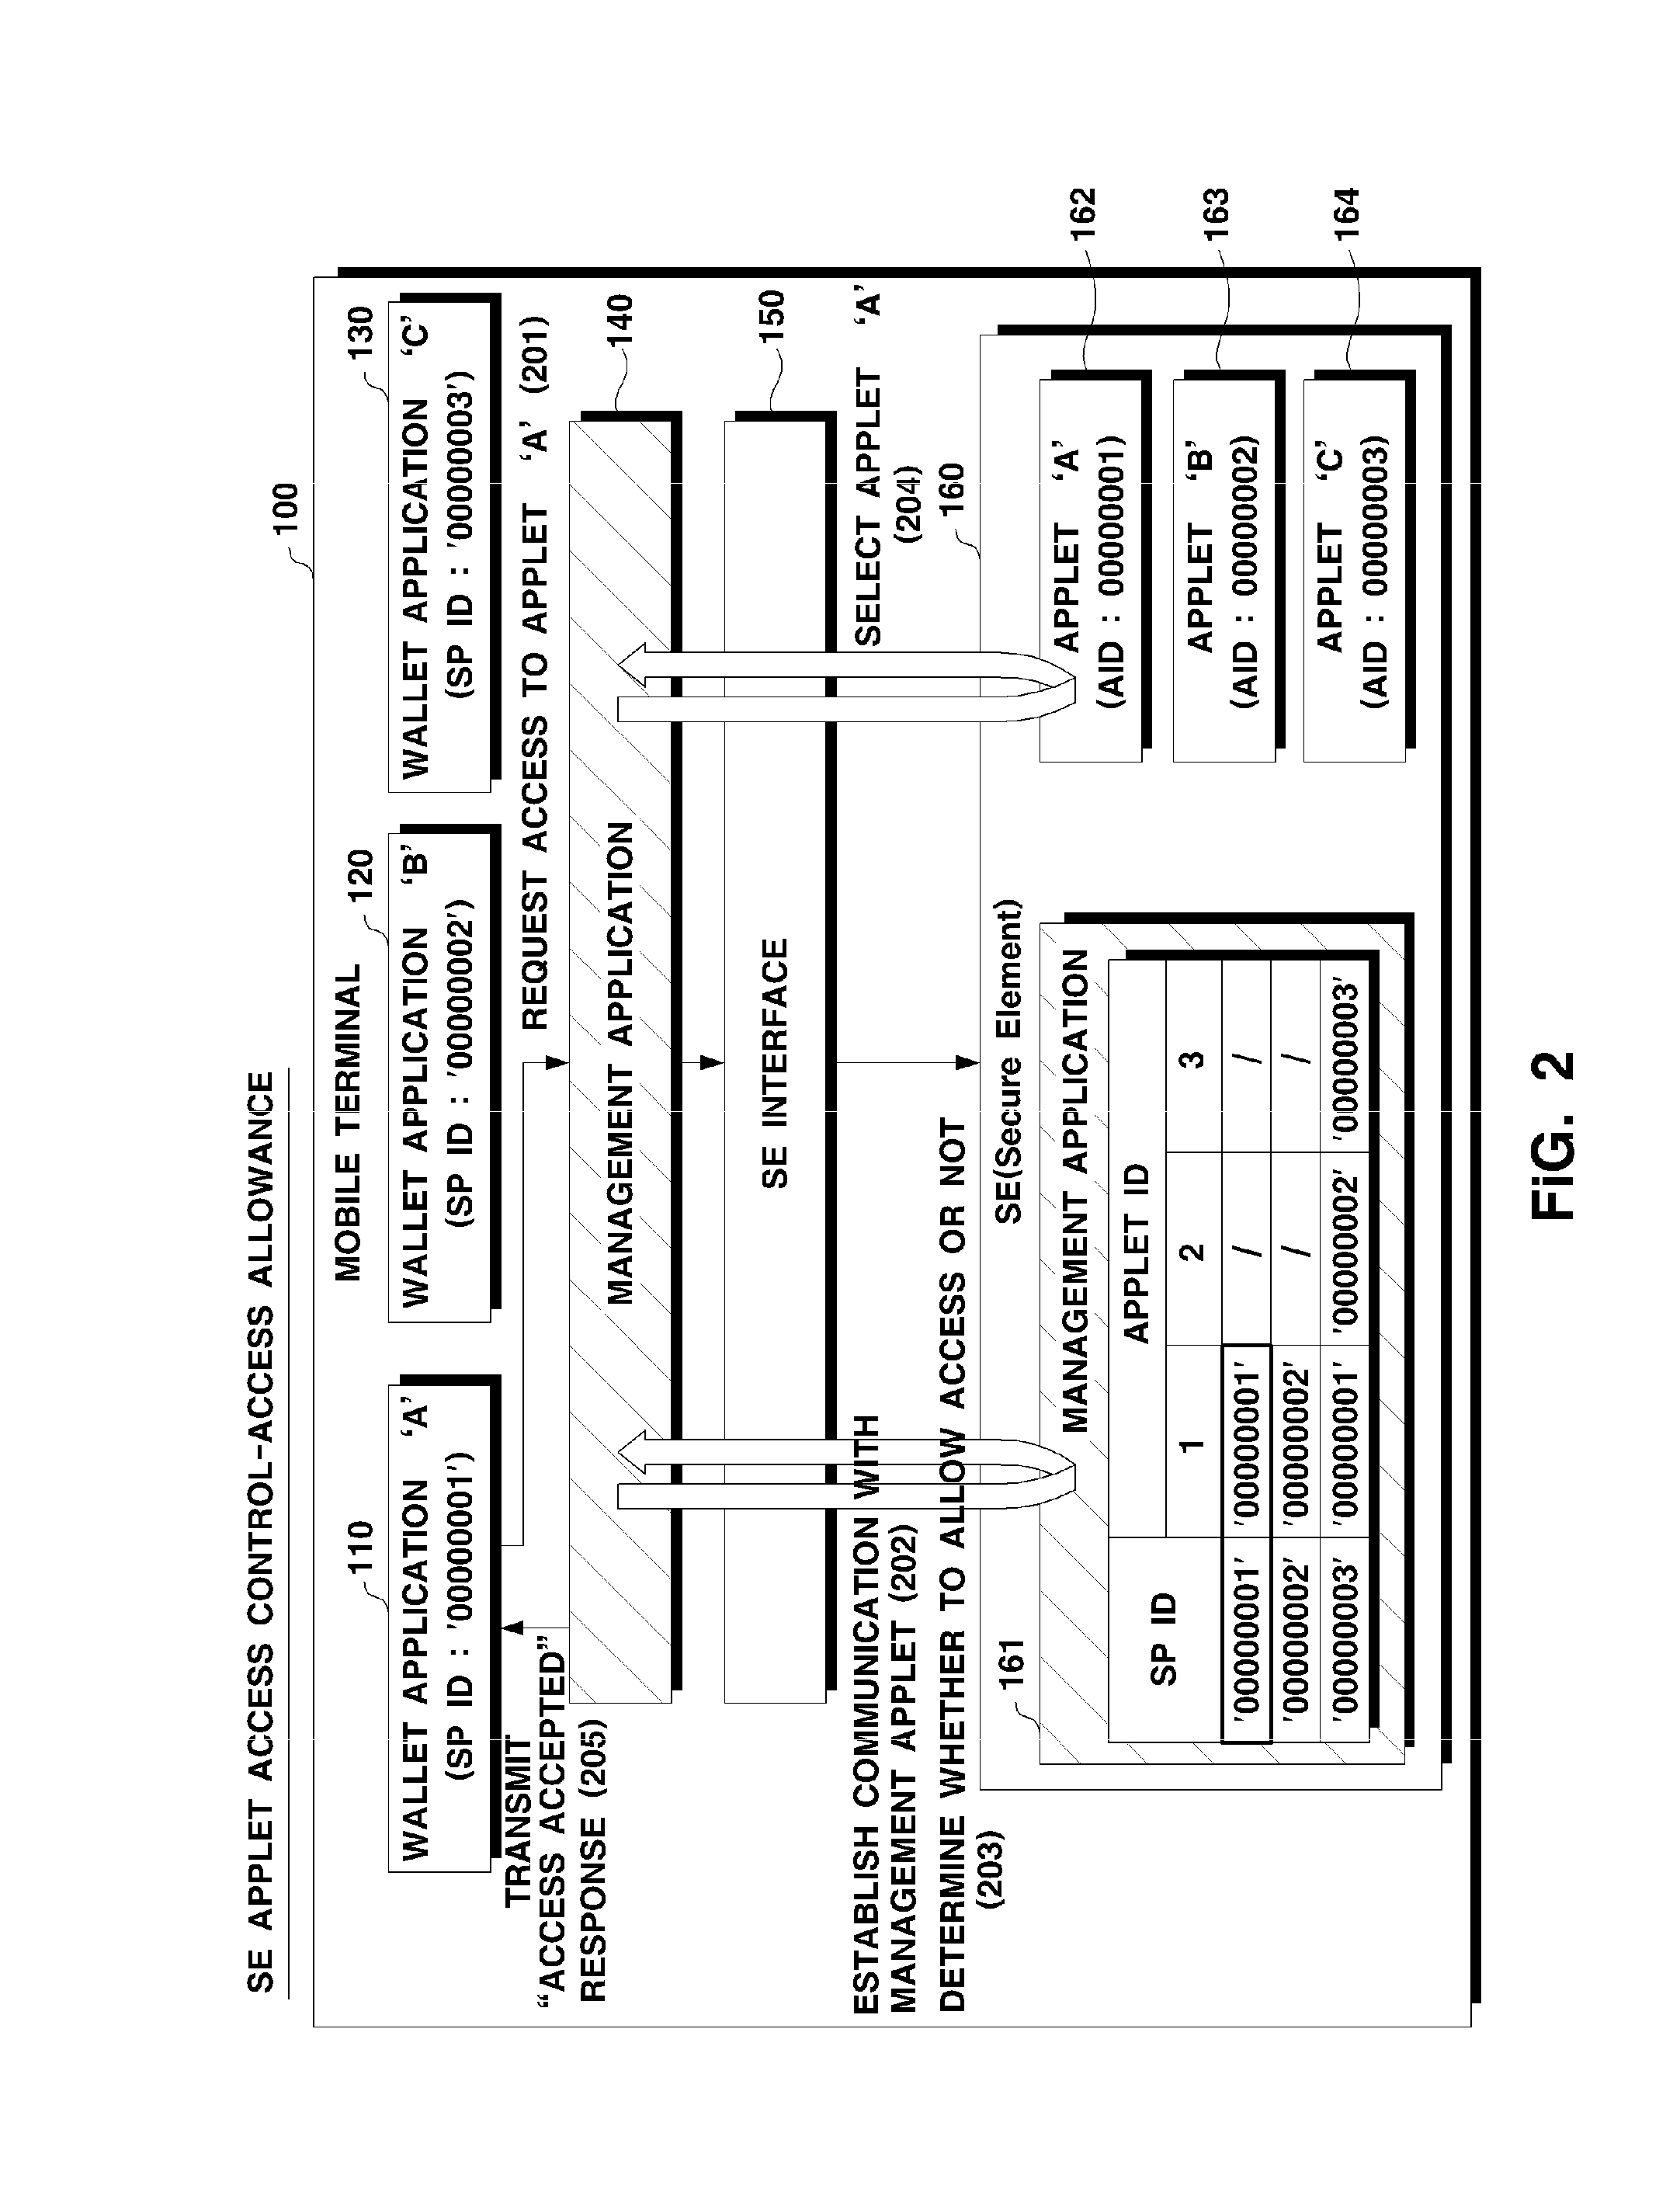 System and method for controlling access to applet